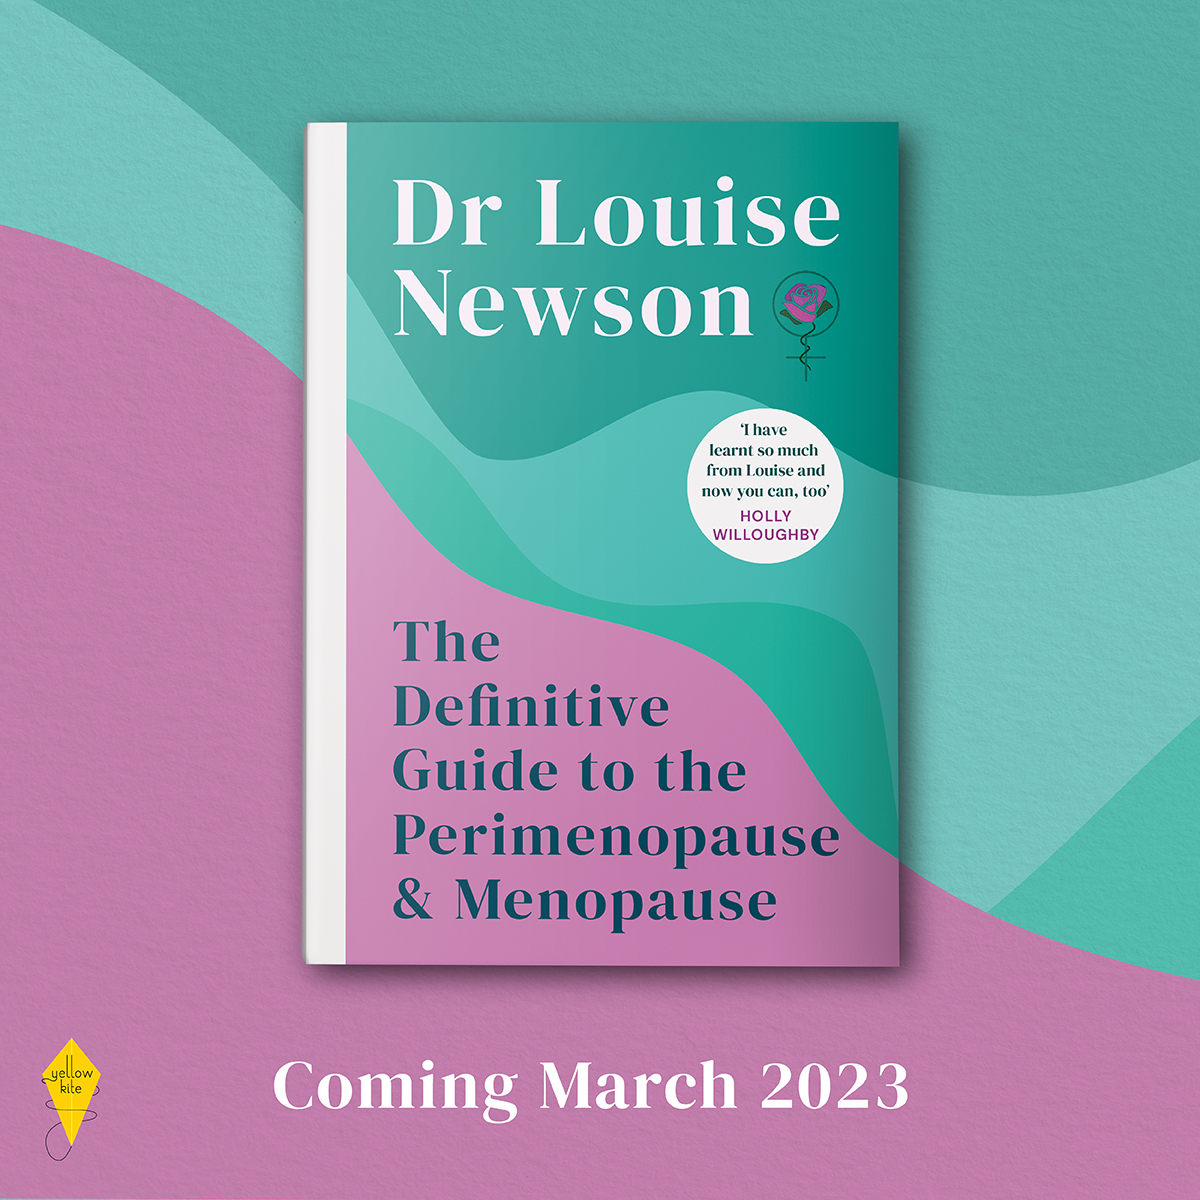 balance Dr Louise Newson announces new book, The Definitive Guide to